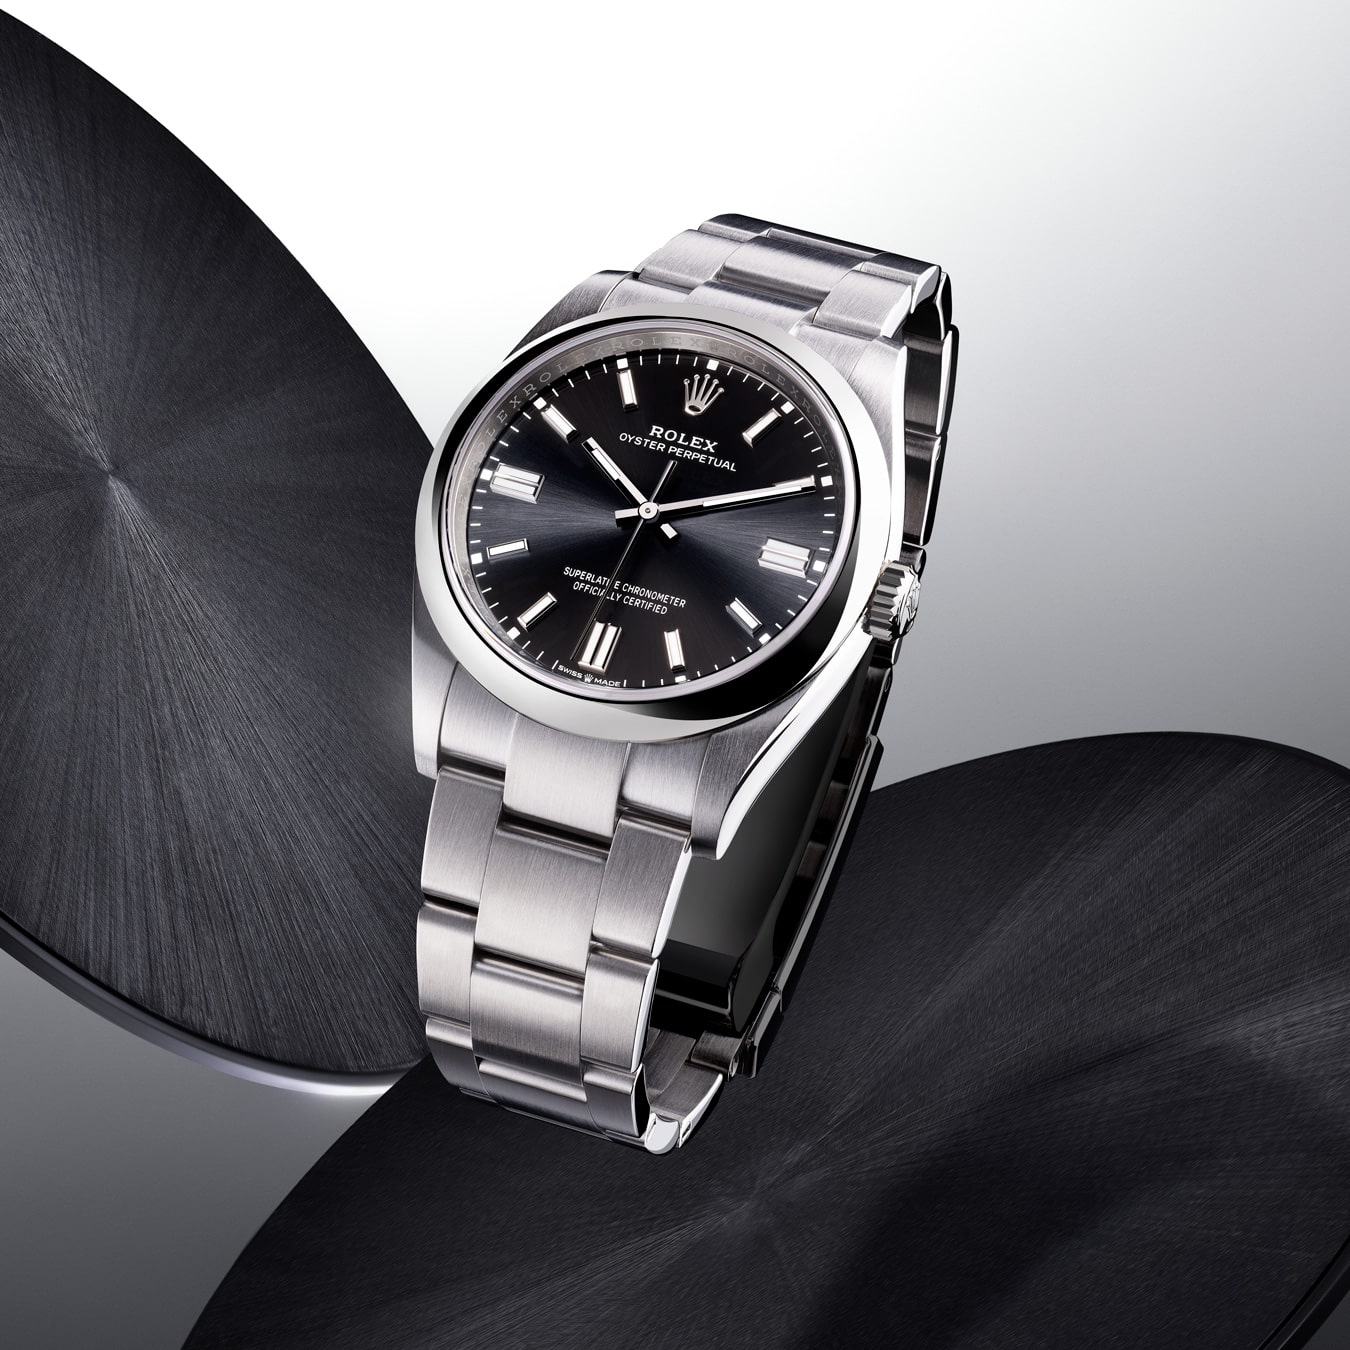 Rolex Oyster Perpetual at David M Robinson